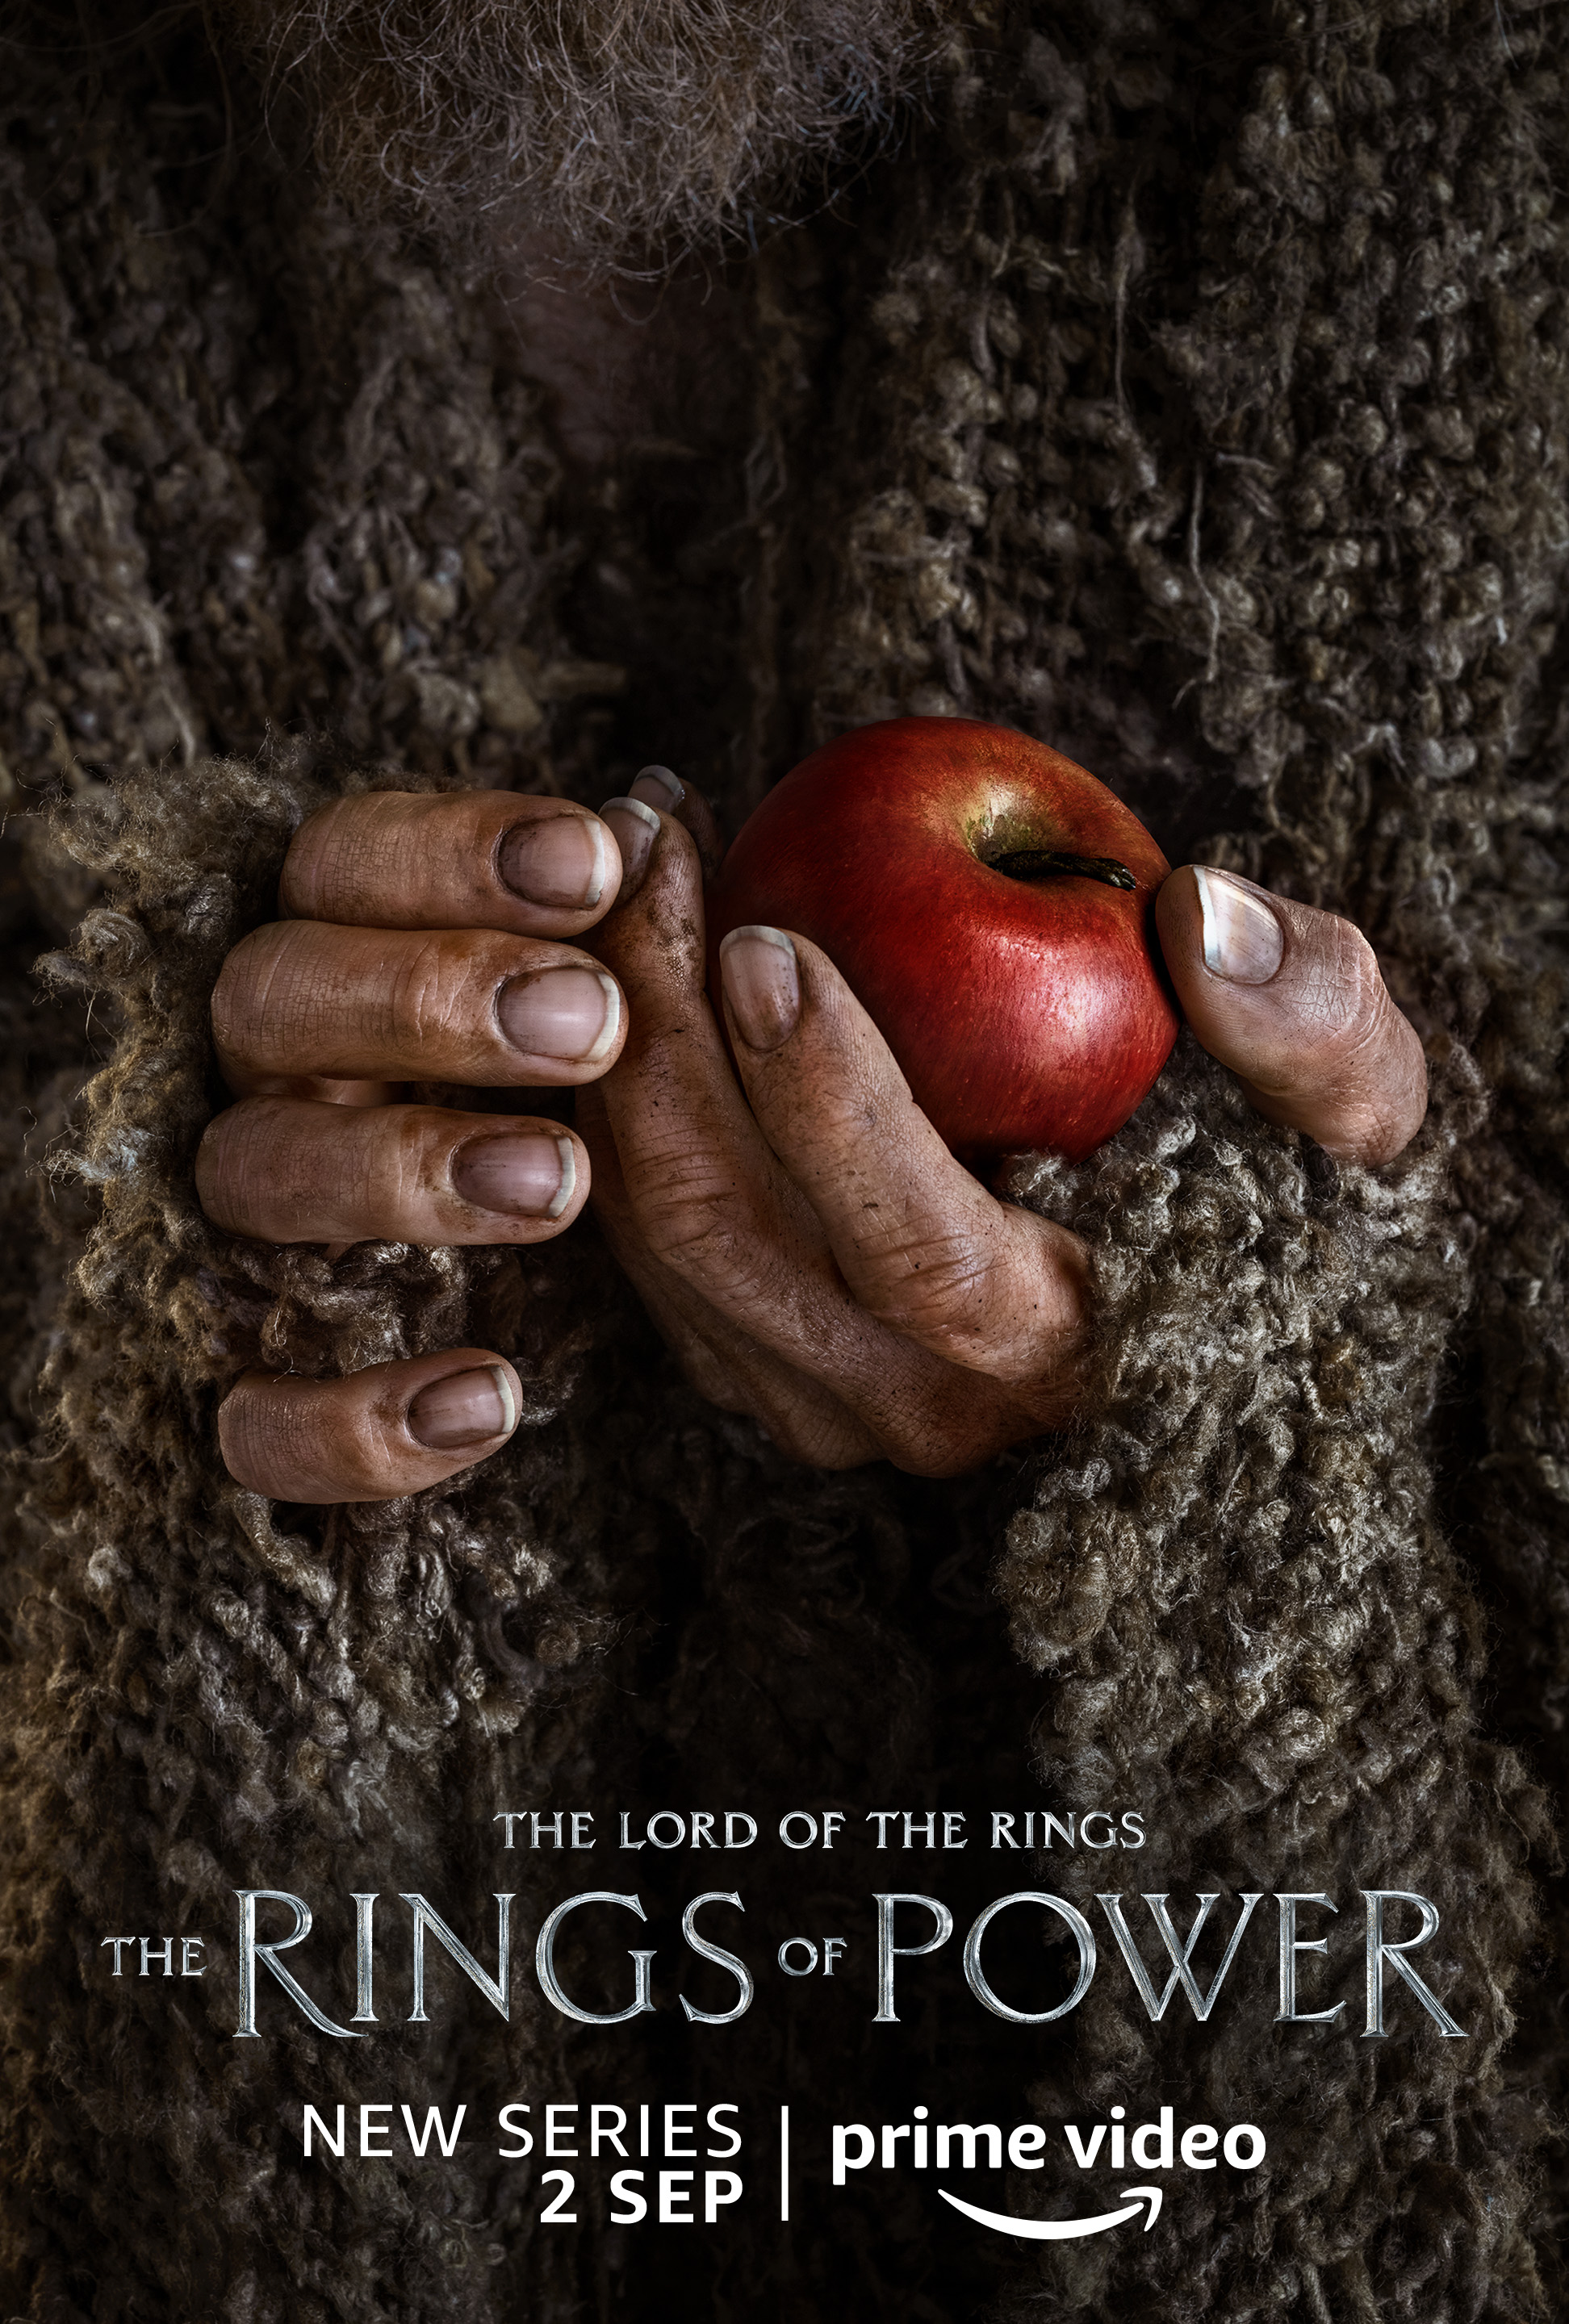 A human holding an apple character poster for Lord of the Rings: The Rings of Power